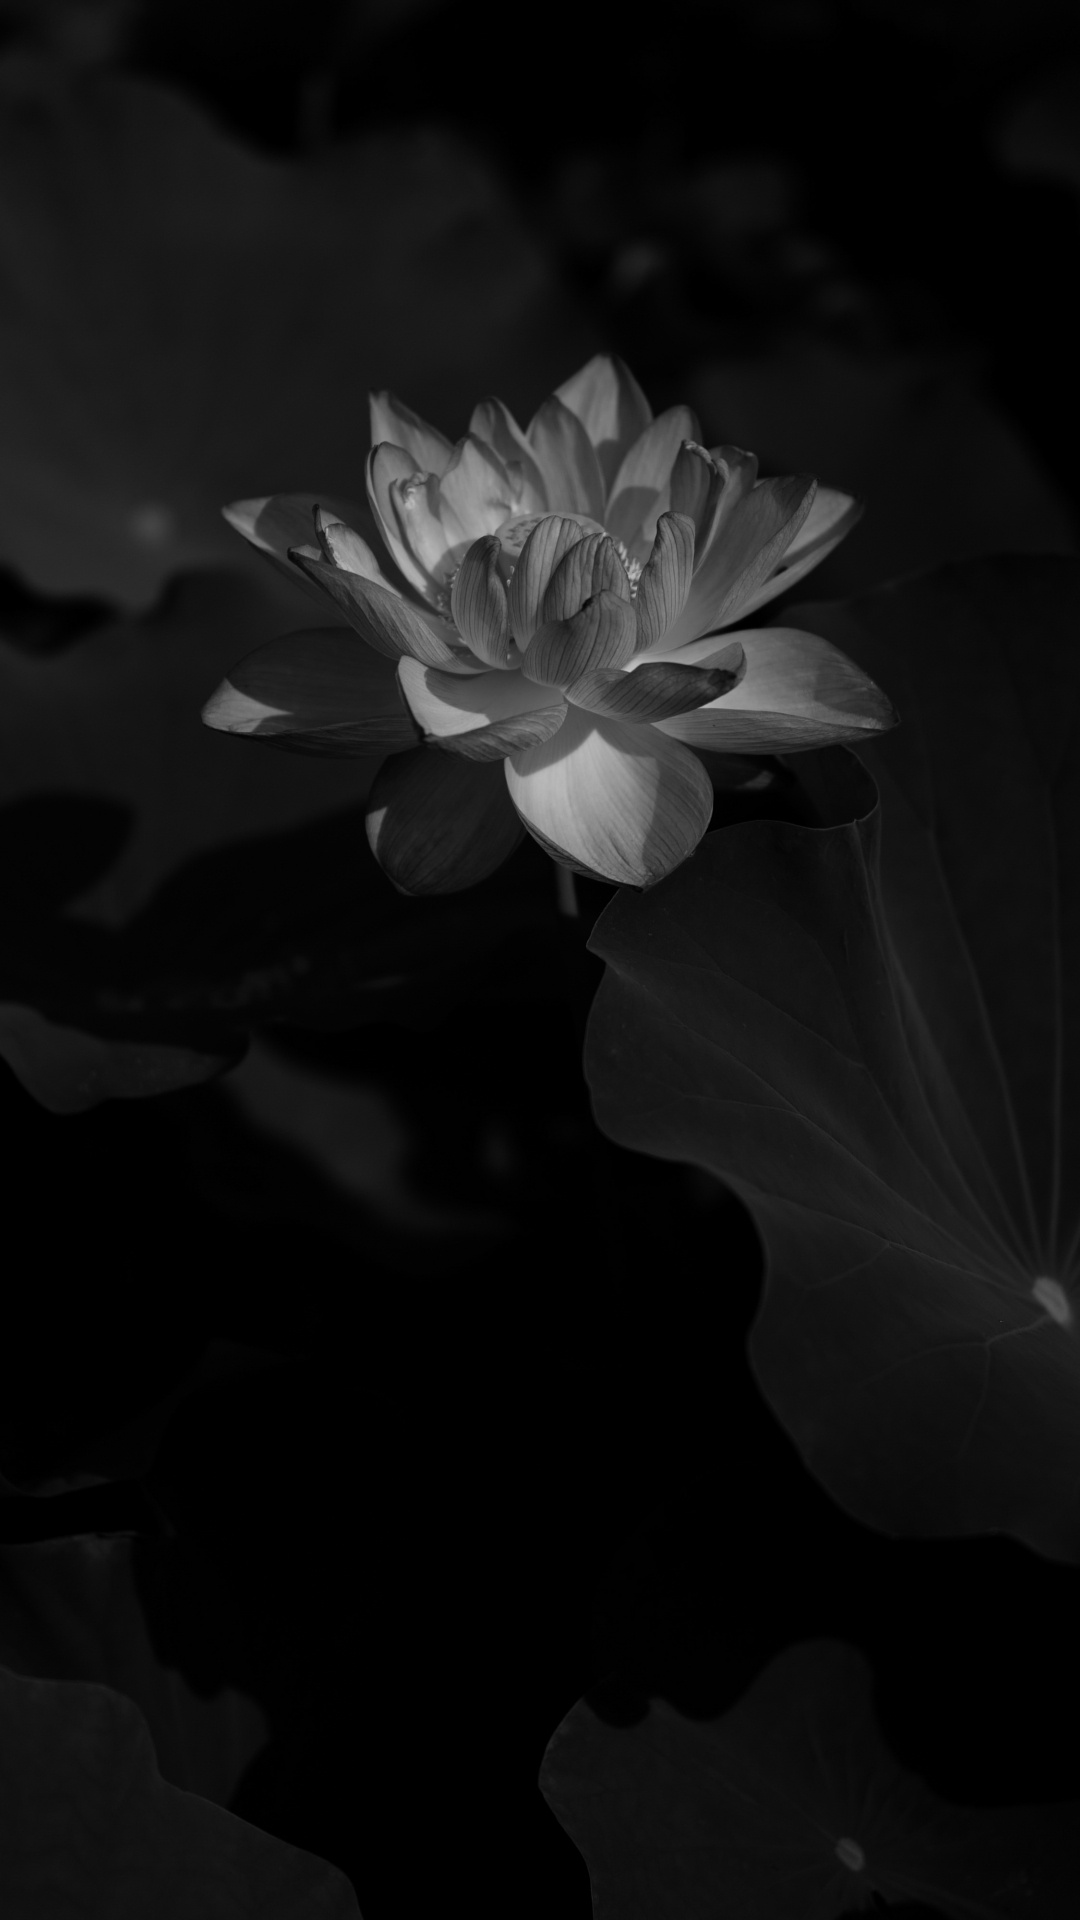 Grayscale Photo of a Flower. Wallpaper in 1080x1920 Resolution